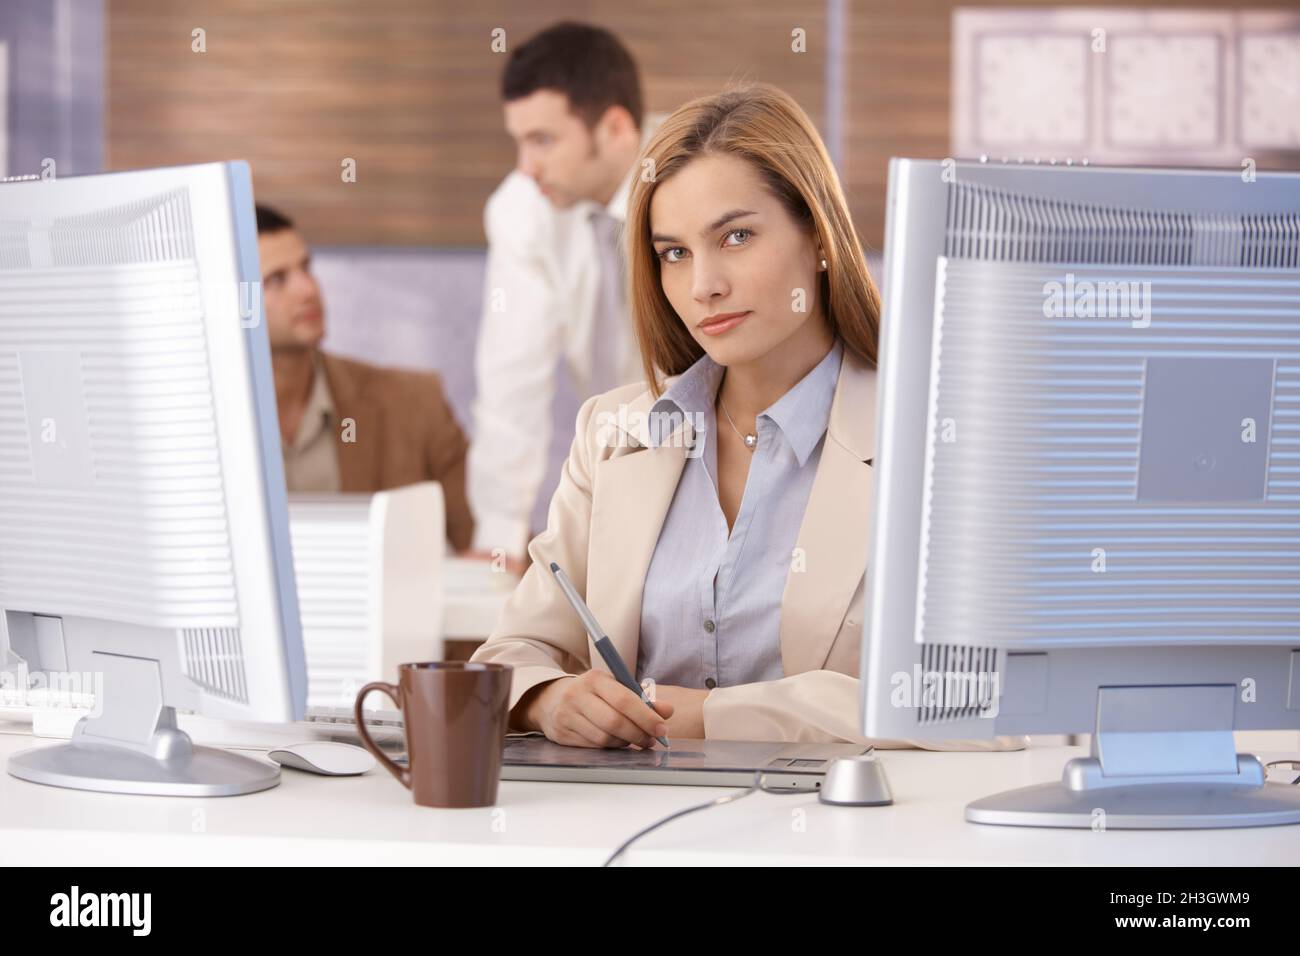 Young woman learning computer graphic design Stock Photo